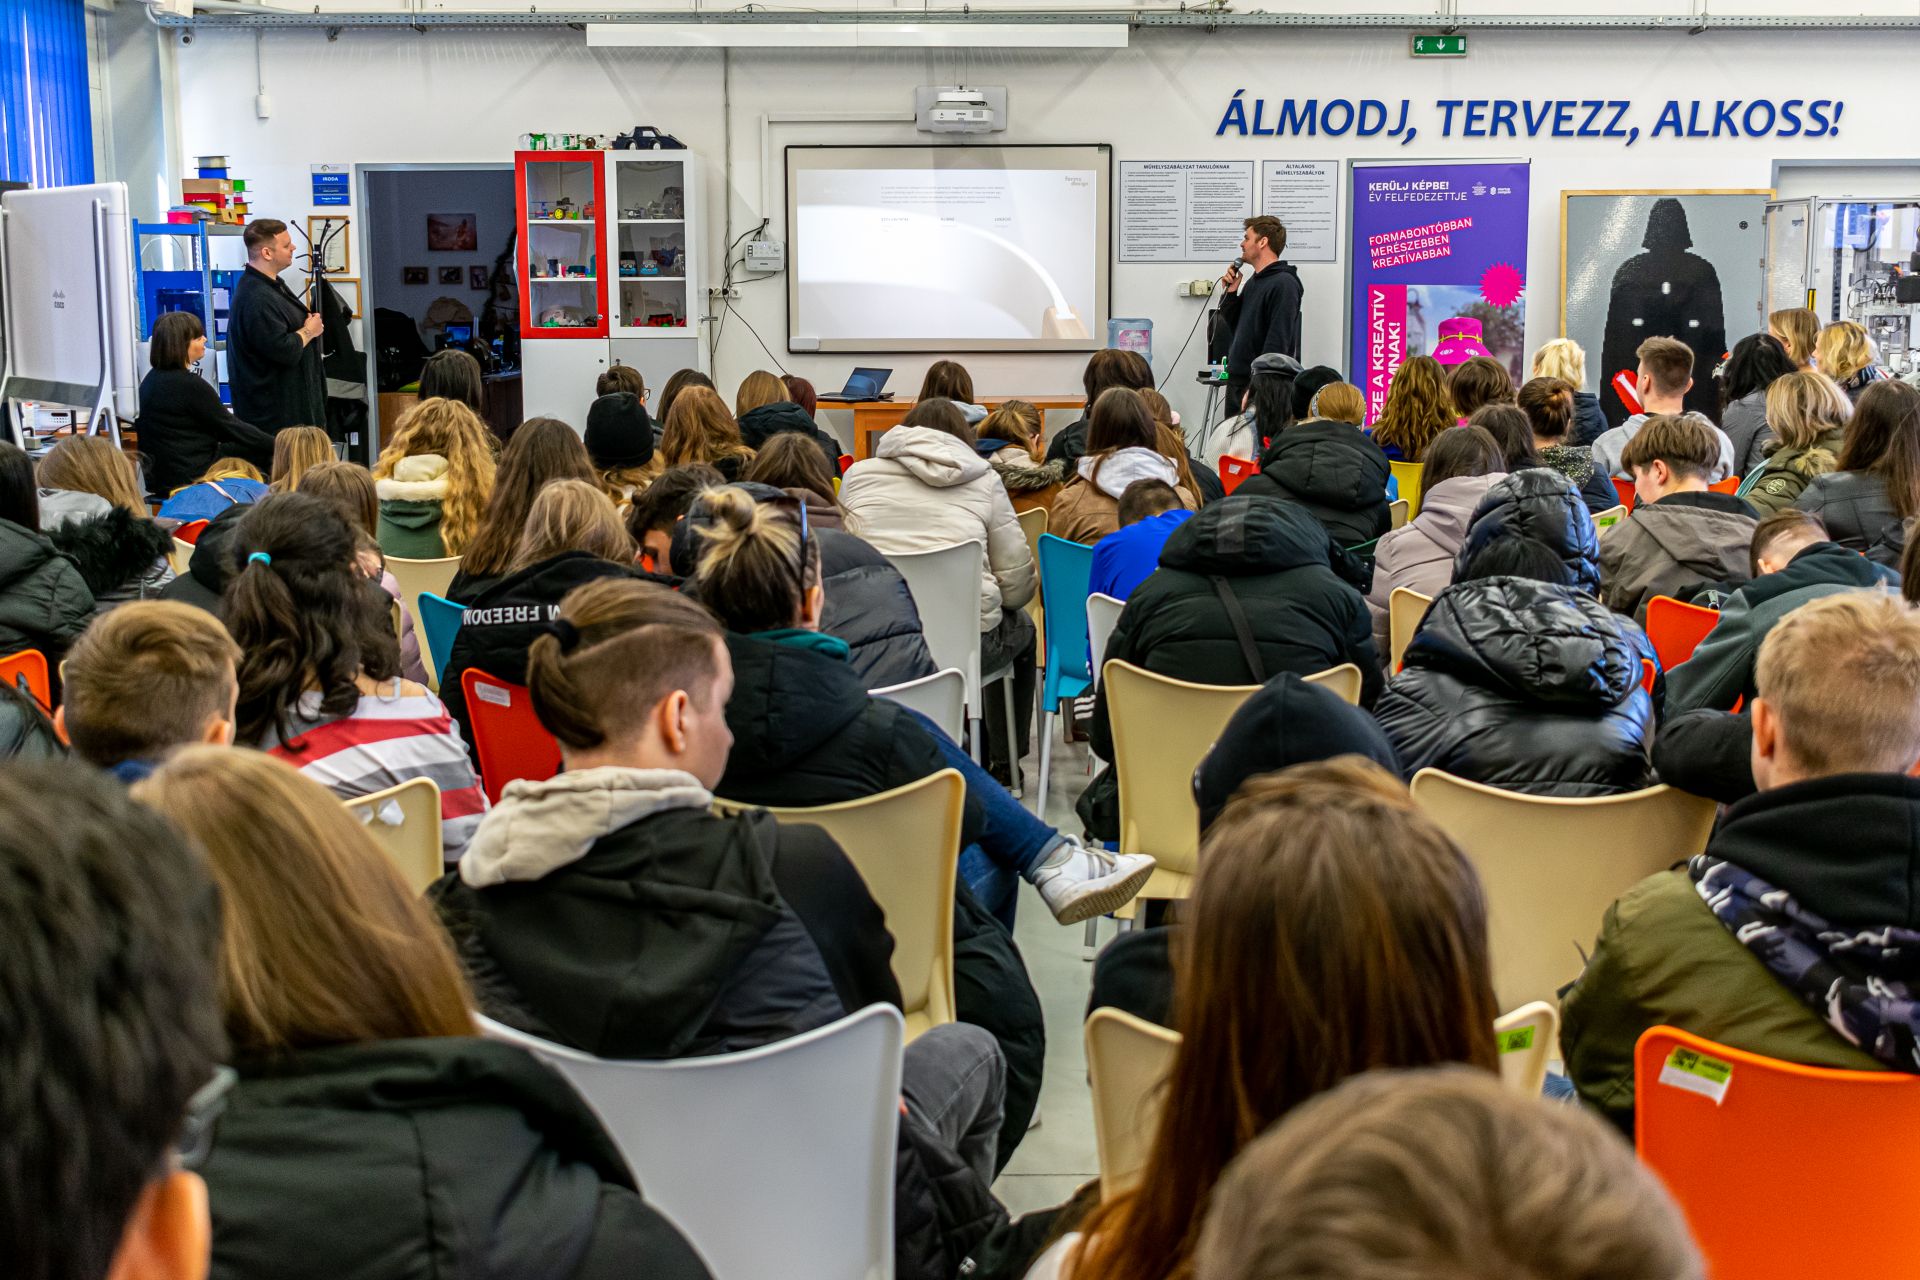 The Hungarian Fashion & Design Agency held a vocational guidance day in Nyíregyháza